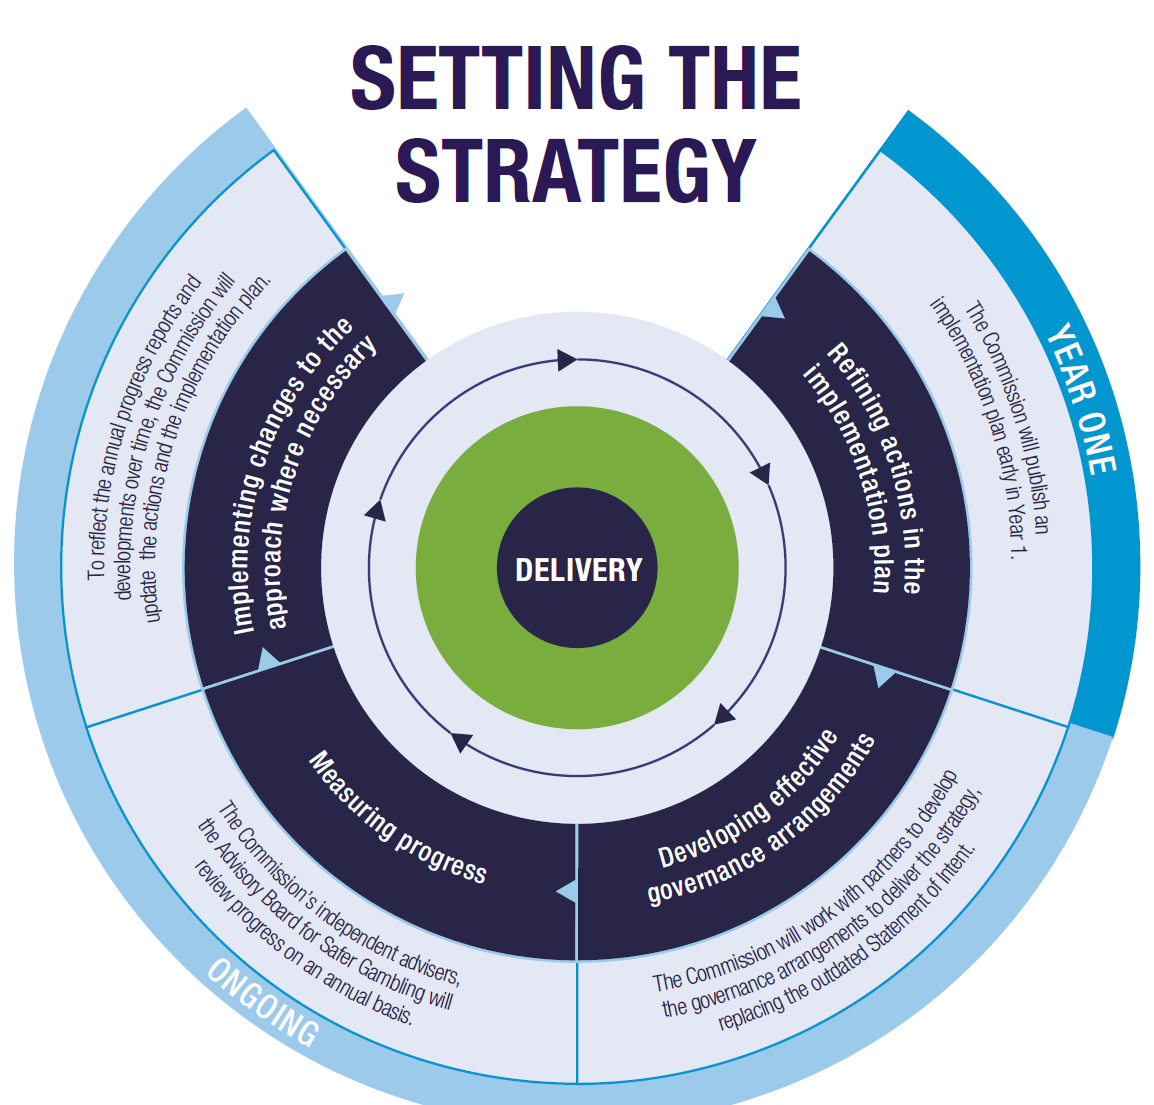 Image 3 - Delivery of the strategy - the image is an incomplete circle, made up of 5 layers, broken down into 4 segments. The segments show the plans for the strategy, both in year 1 and ongoing. 